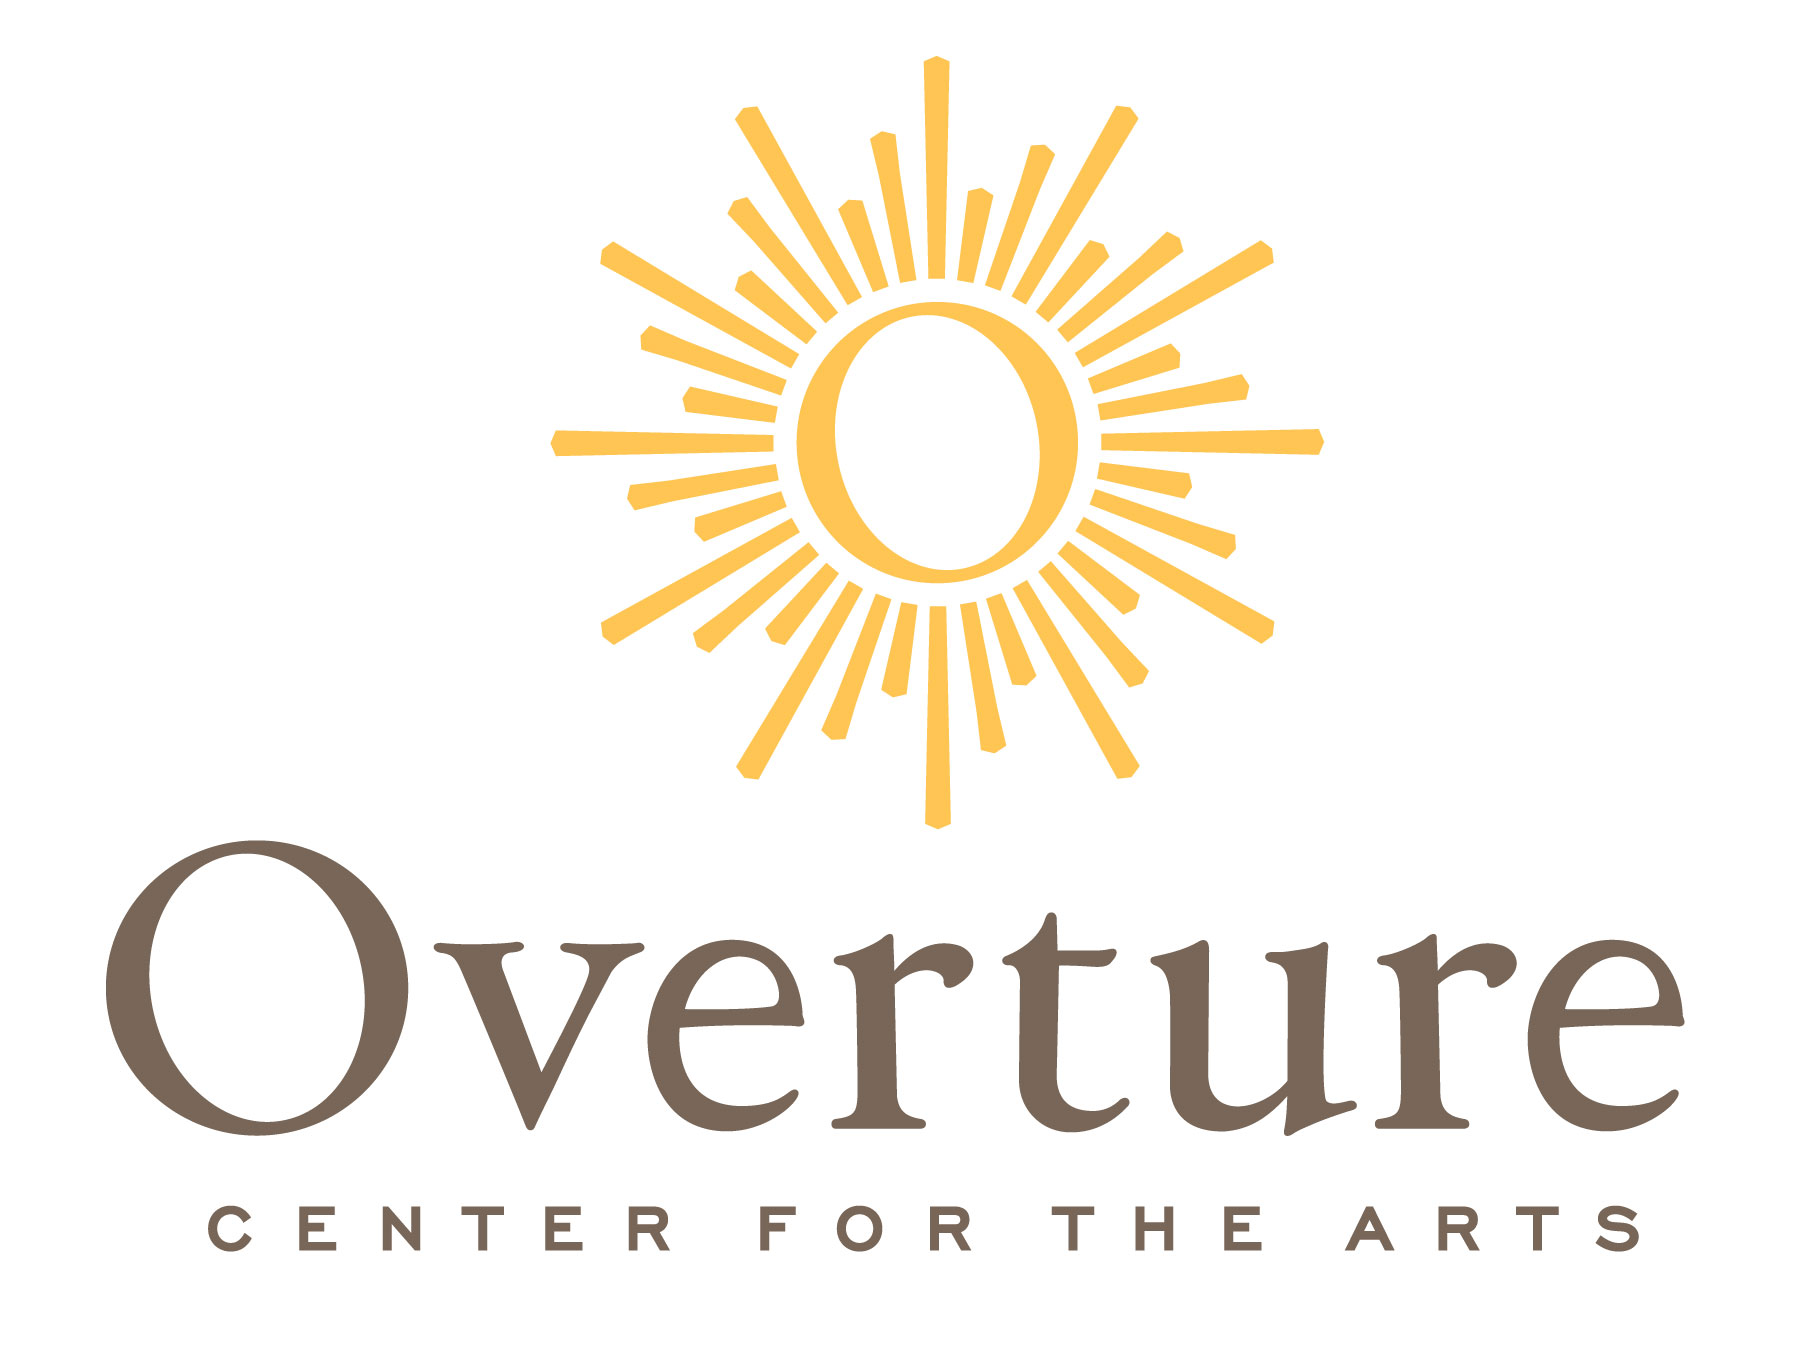 Overture Center for the Arts